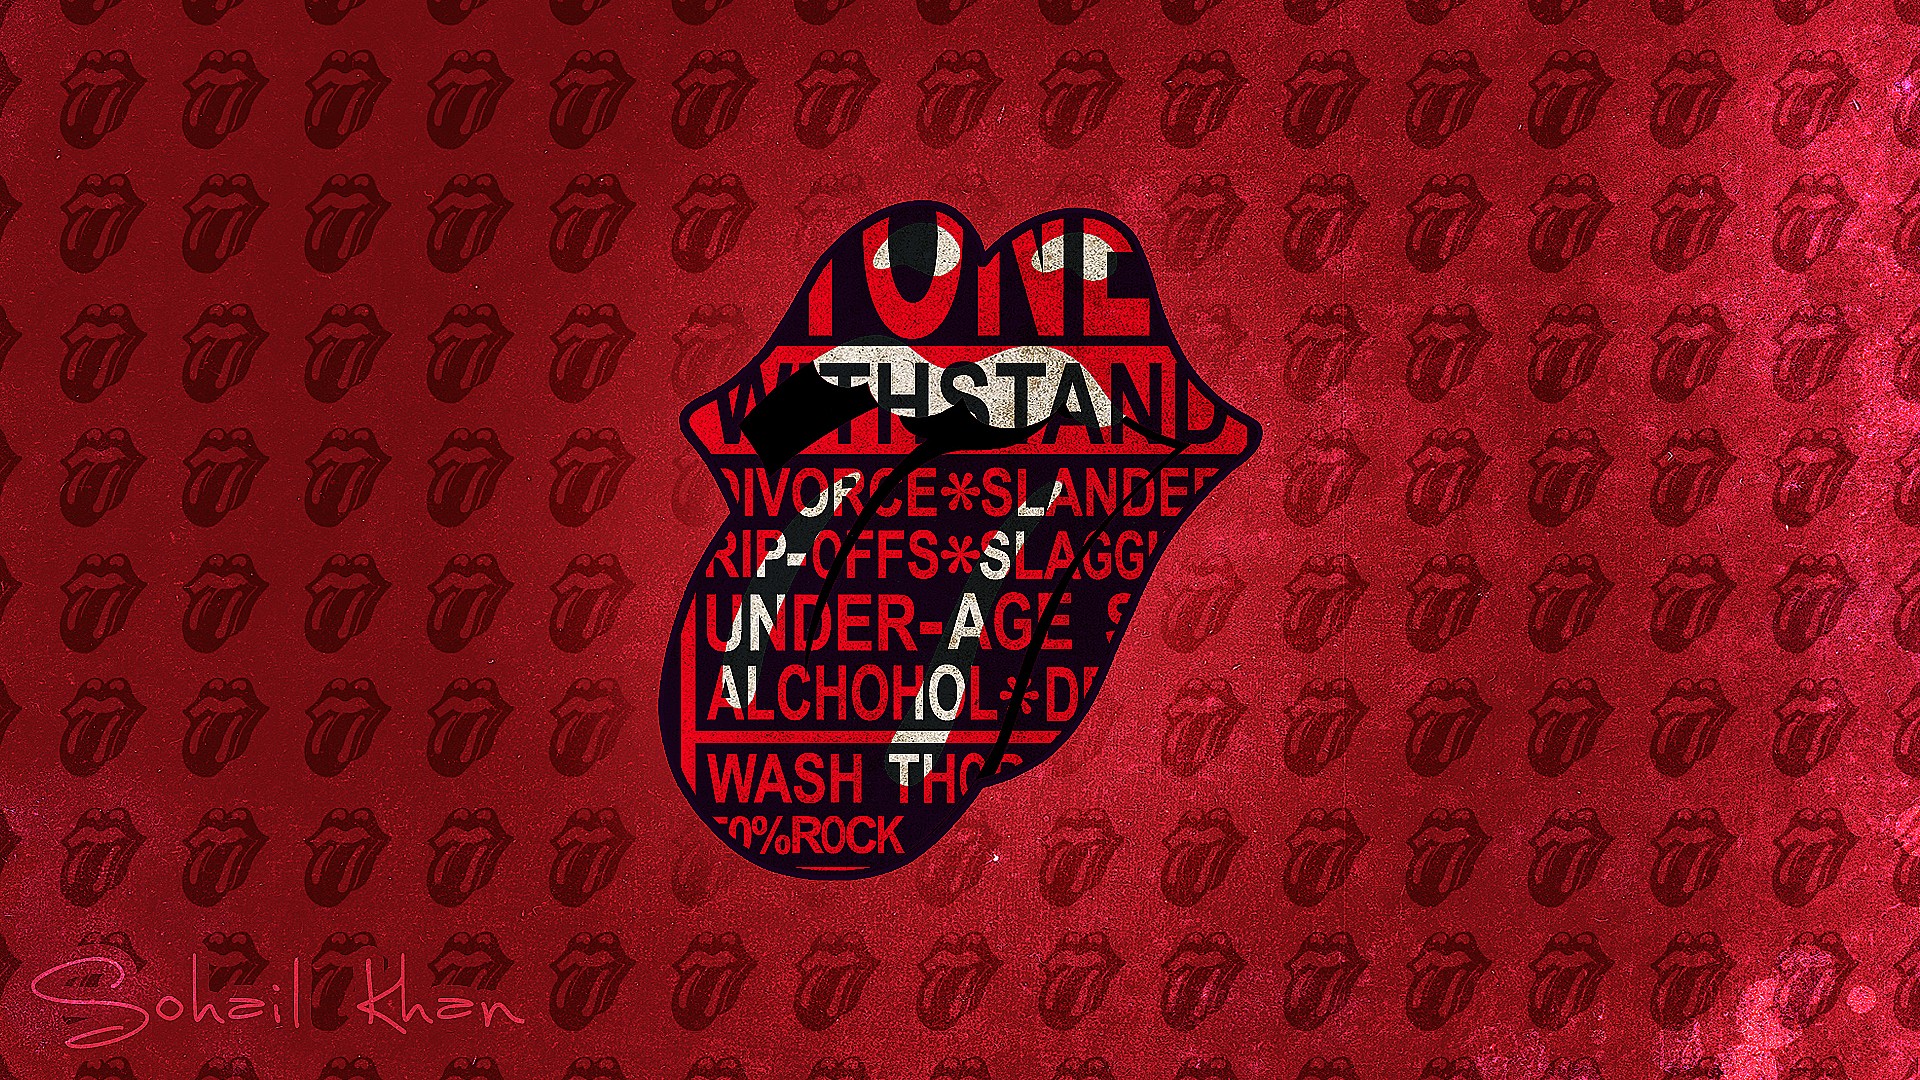 Rolling Stones Wallpaper Group